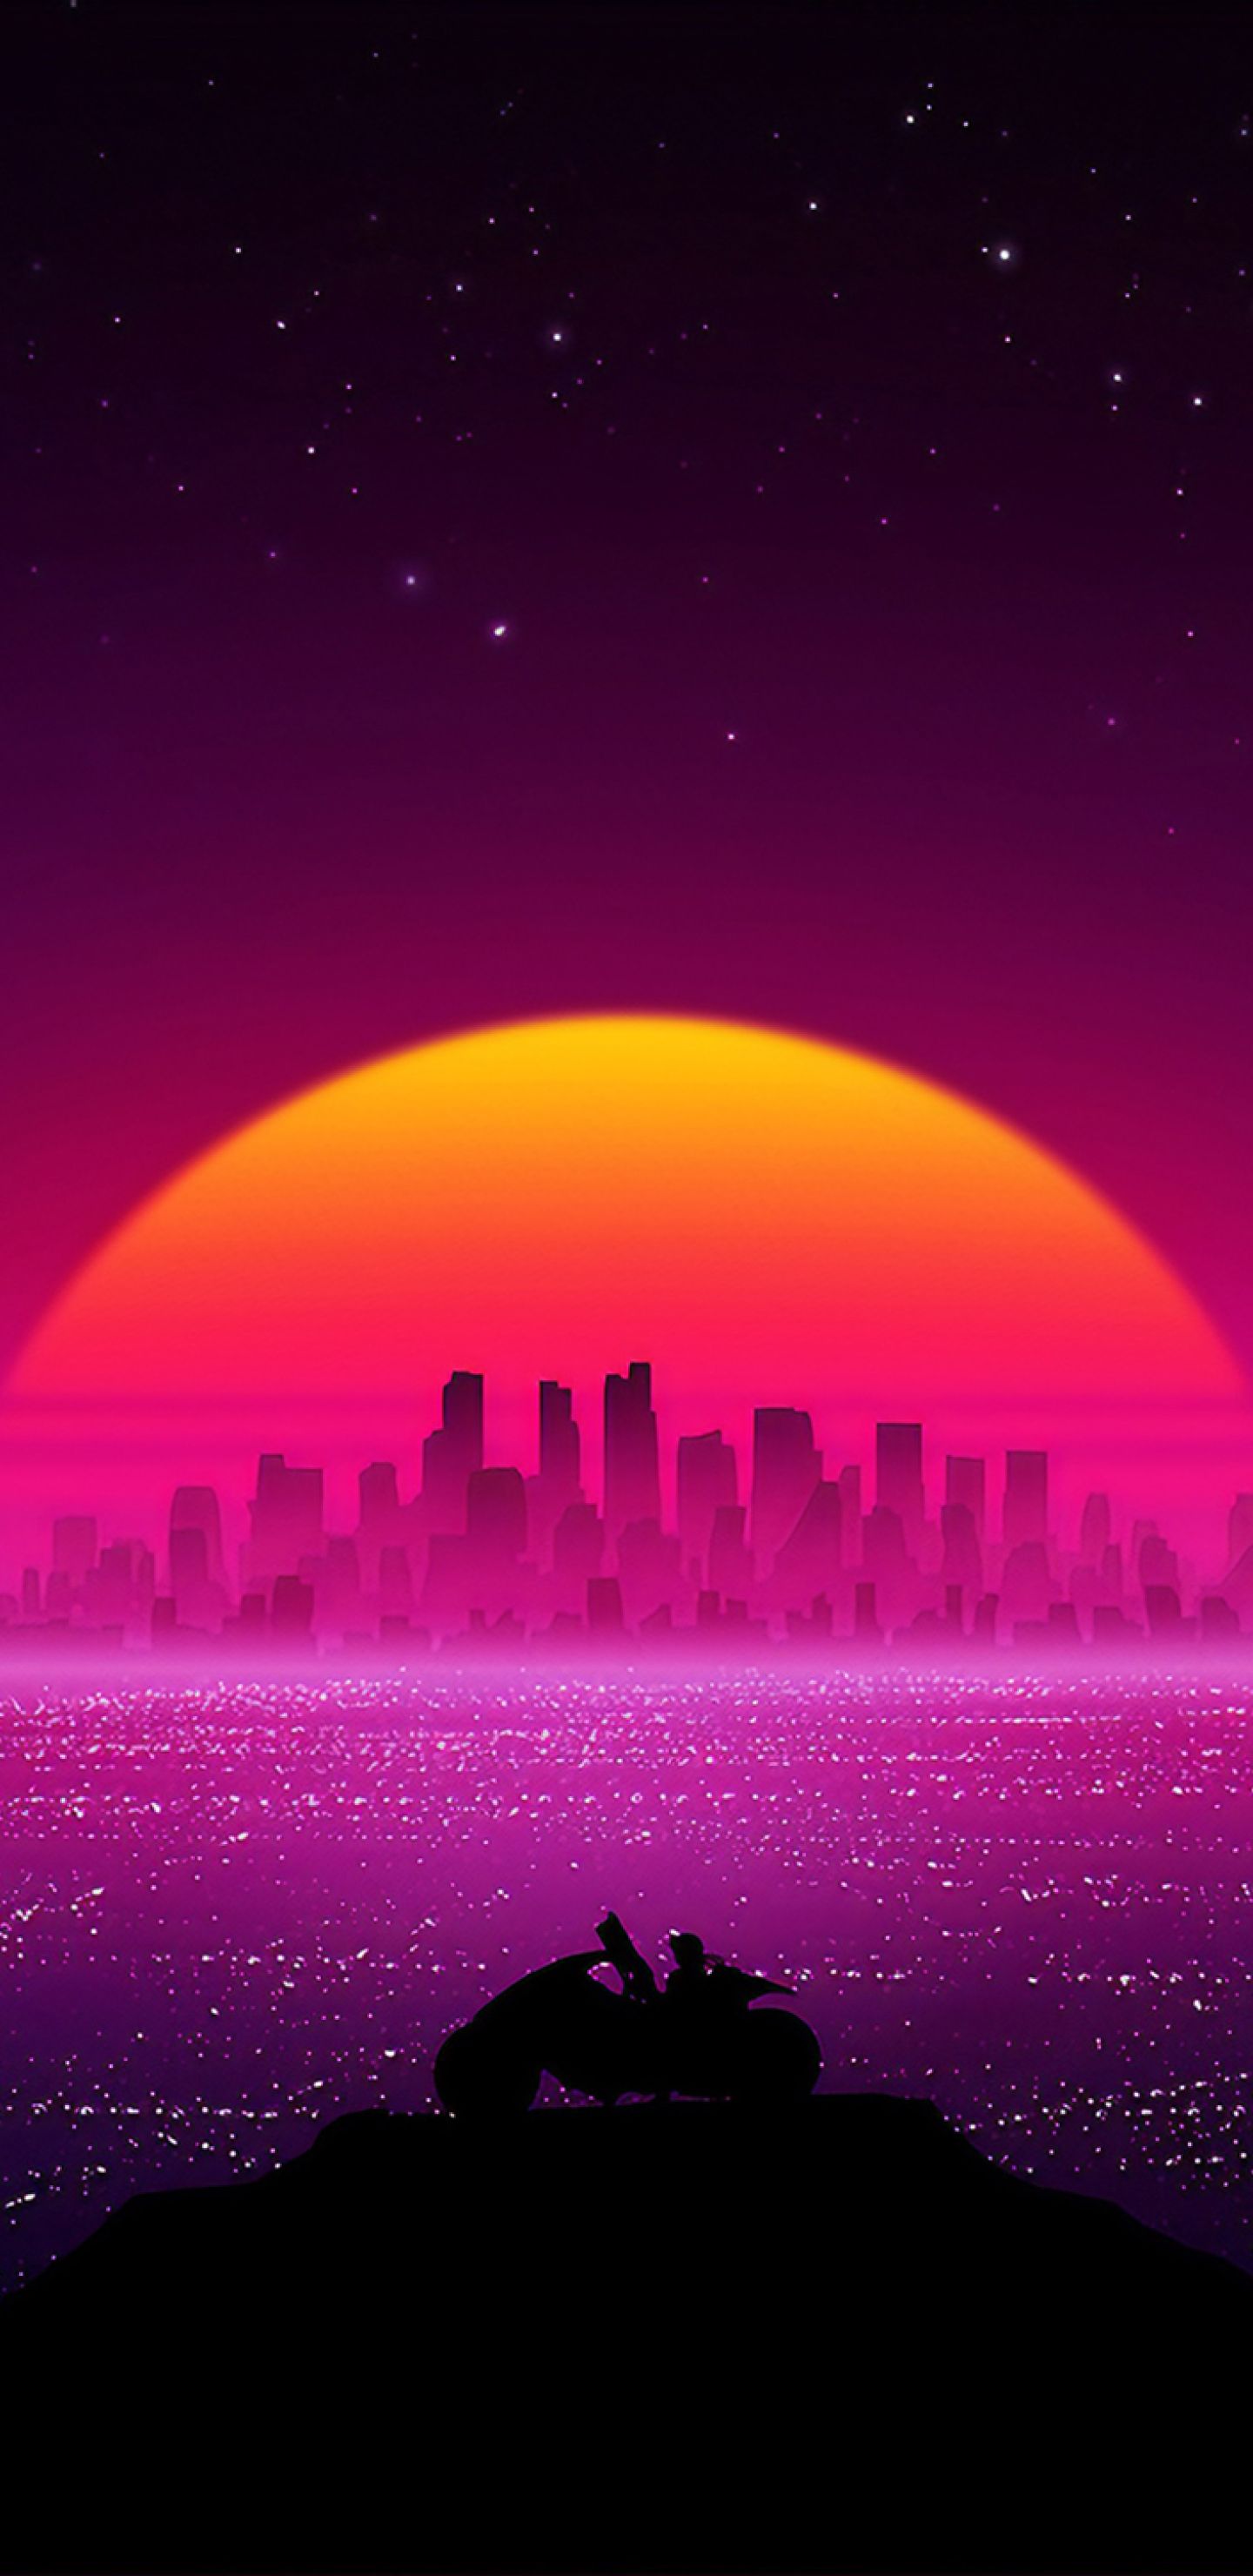 80s synthwave aesthetic wallpaper for mobile devices with a couple sitting on a hill watching the sunset over a city - 3D